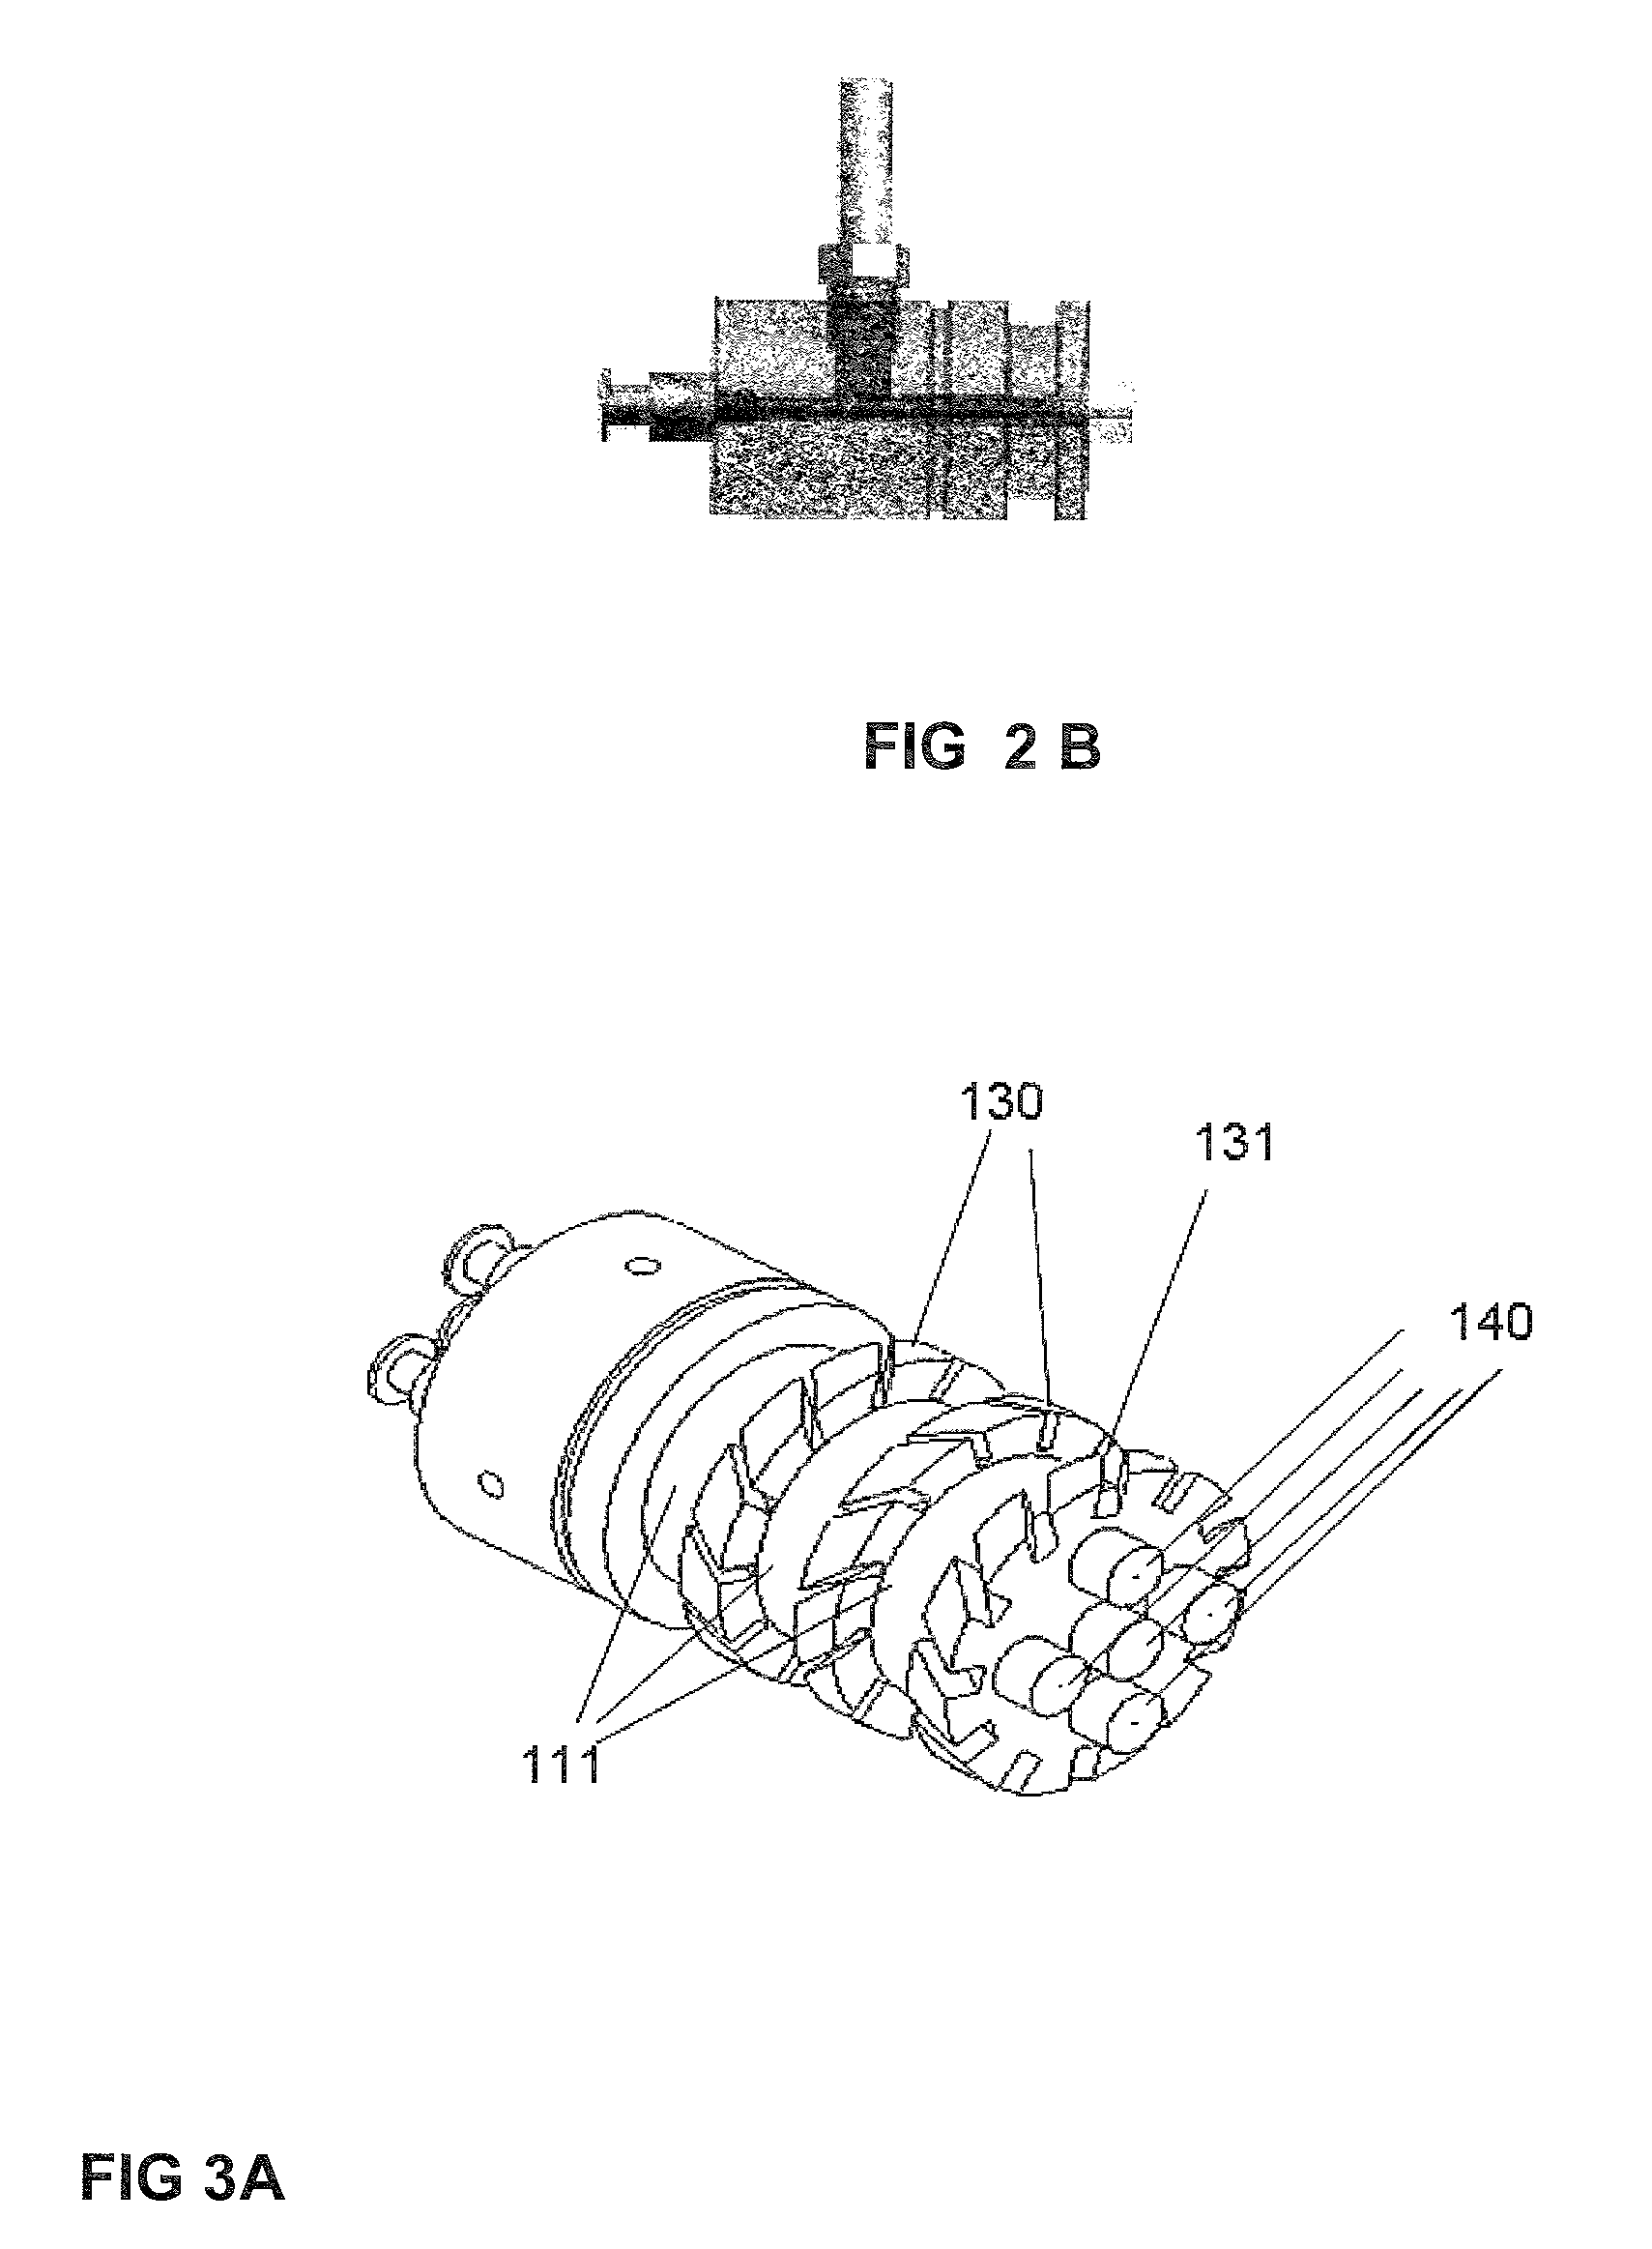 Aerosol processing and inhalation method and system for high dose rate aerosol drug delivery